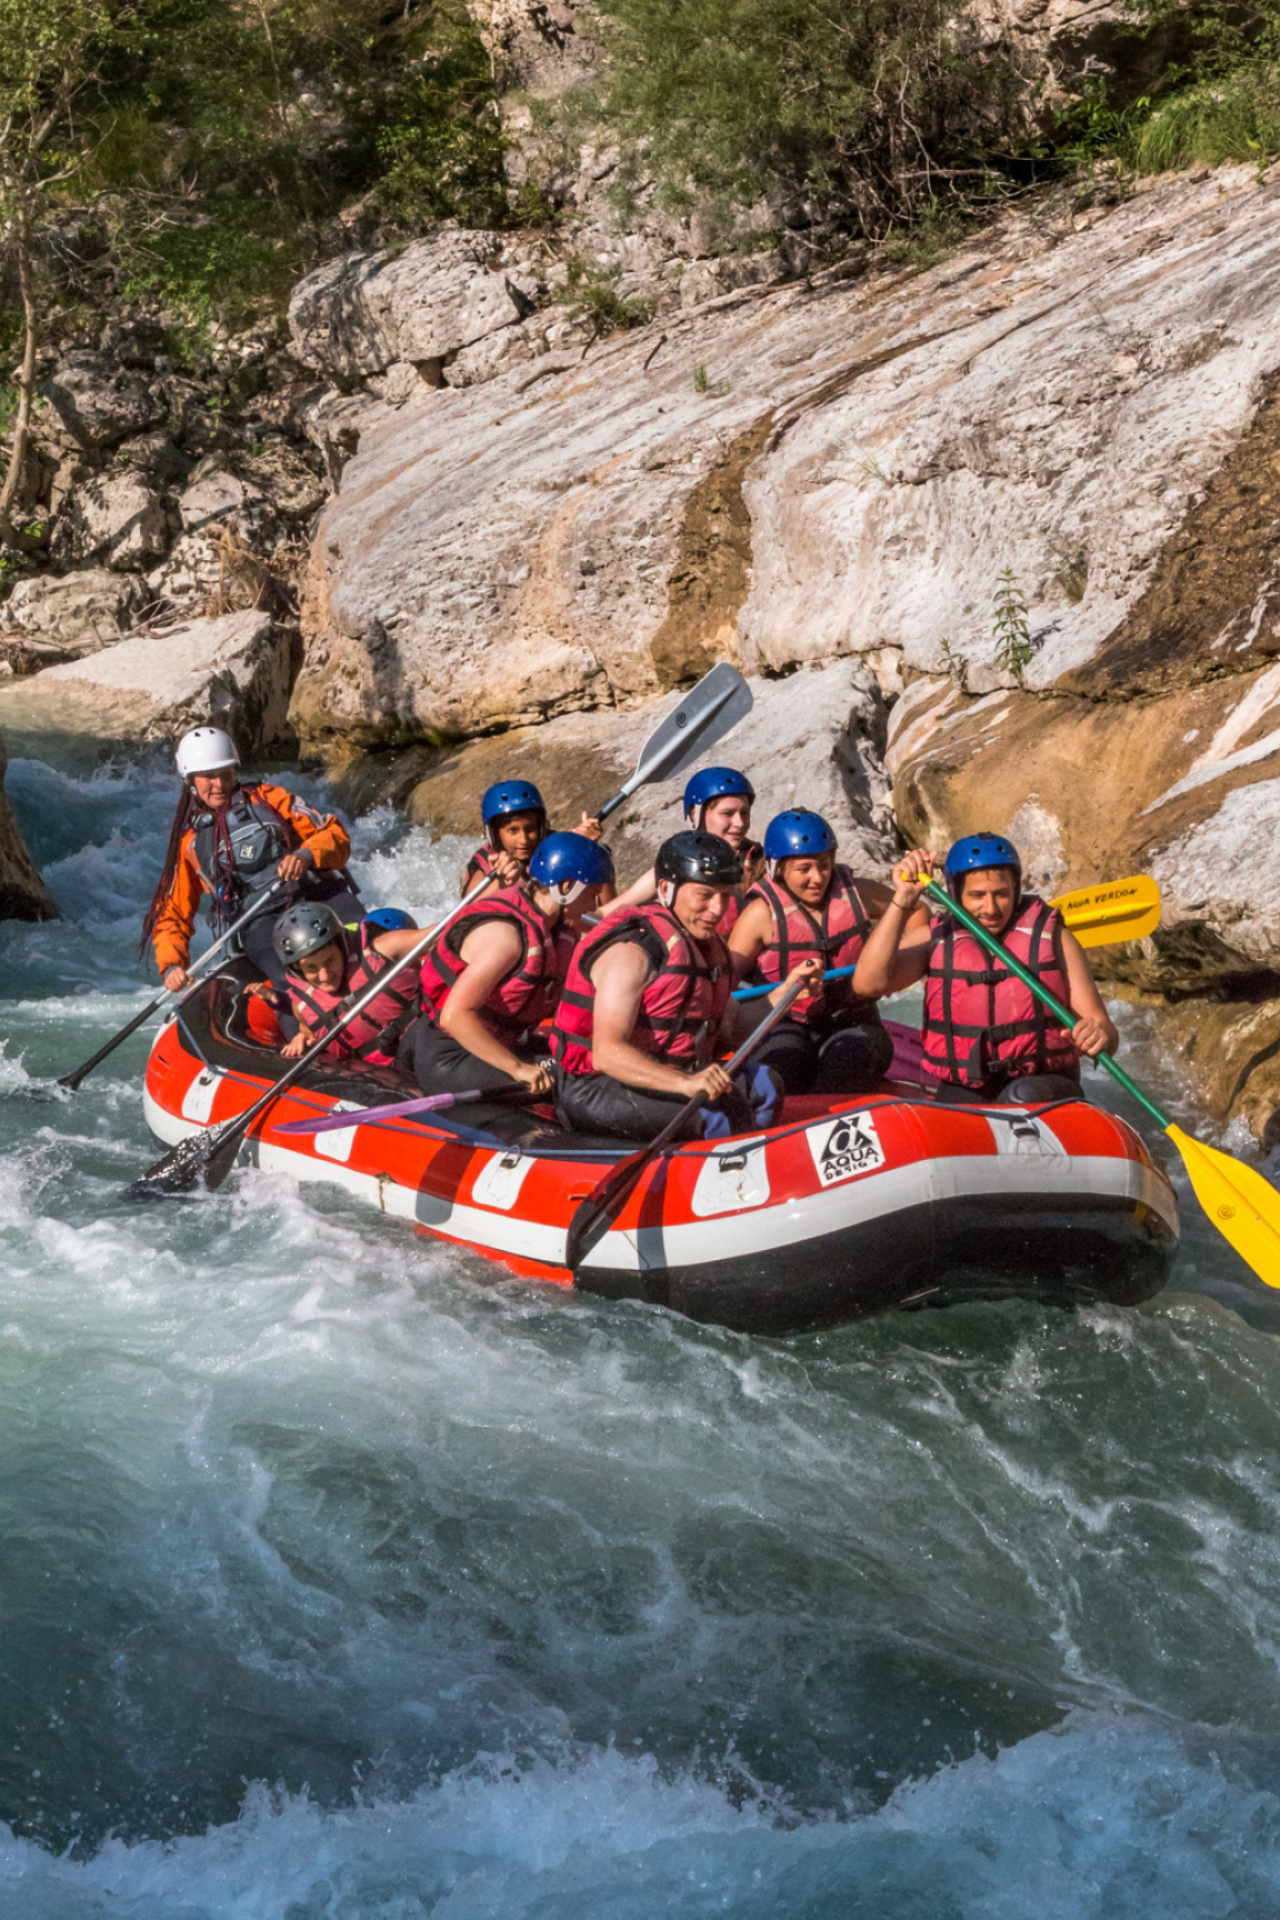 Rafting: A team prepares to maneuver before a small drop, Intense water rapids. 1280x1920 HD Wallpaper.